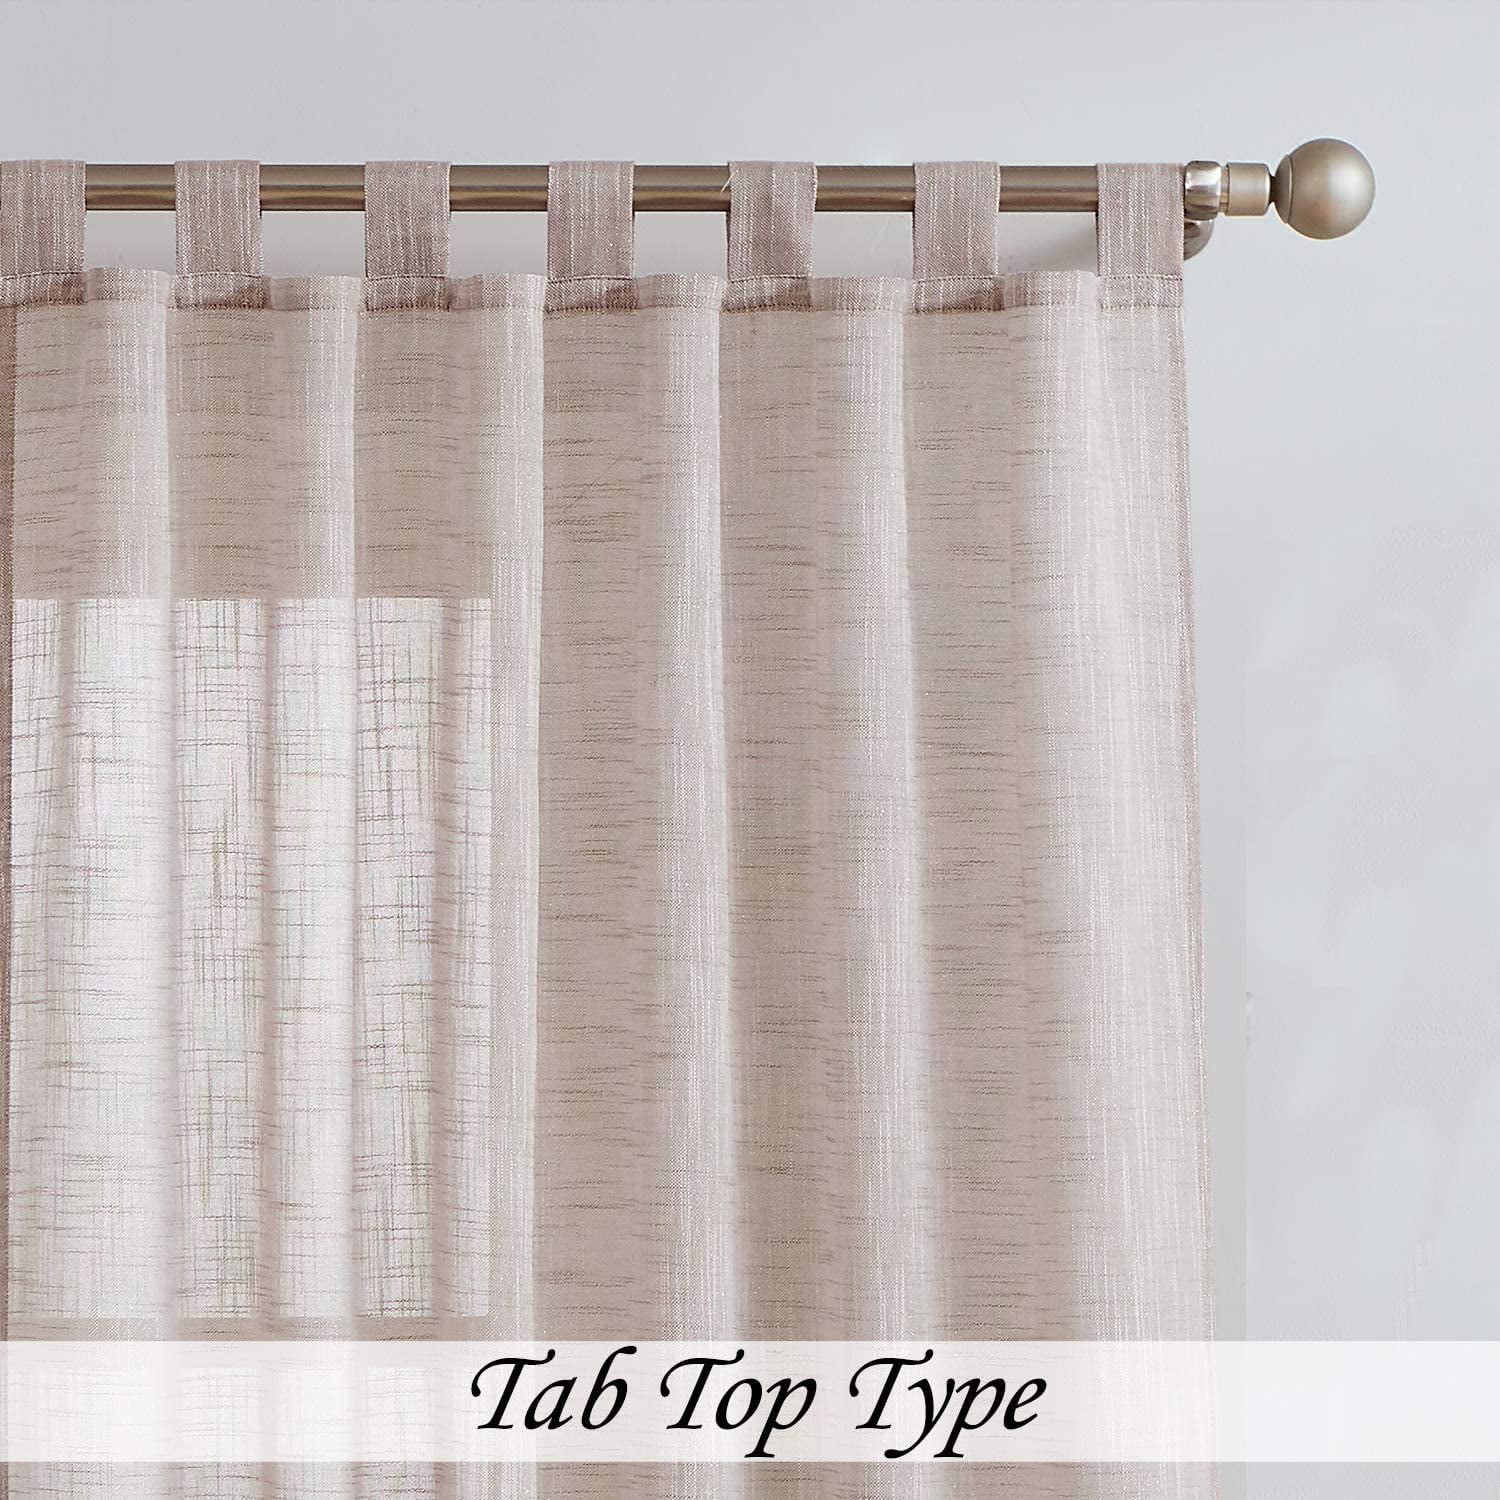 Cotton Curtains,2 Panels Curtain,Tab Top Curtains,Room Darkening Drapes,Curtains for Bedroom,Curtains for Living Room,Curtains Set of 2 Farm House Curtain-Cotton Textured Slub Fabric 50x84 White